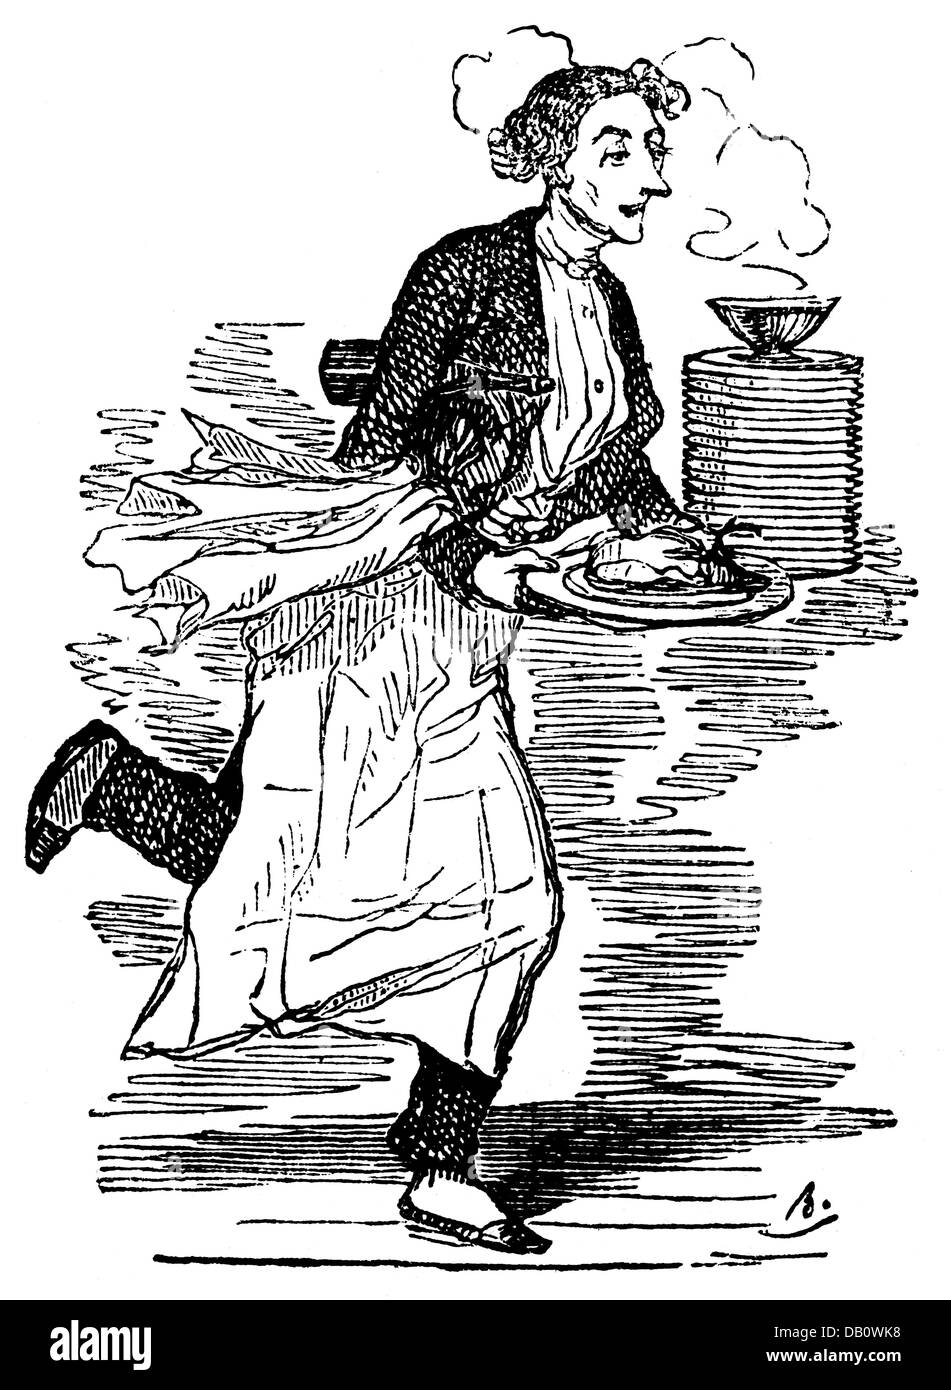 gastronomy, employees / service, waiter, wood engraving, by Bertall (1820 - 1882), 19th century, 19th century, graphic, graphics, France, restaurant, restaurants, waiter, waiters, full length, clothes, outfit, outfits, suit, suits, apron, aprons, cloth, cloths, carrying, carry, bottle, bottles, plate, plates, steam, steaming, occupation, occupations, work, works, speed, quickness, swiftness, fastness, speediness, quickly, swiftly, fast, swift, historic, historical, male, man, people, men, Additional-Rights-Clearences-Not Available Stock Photo